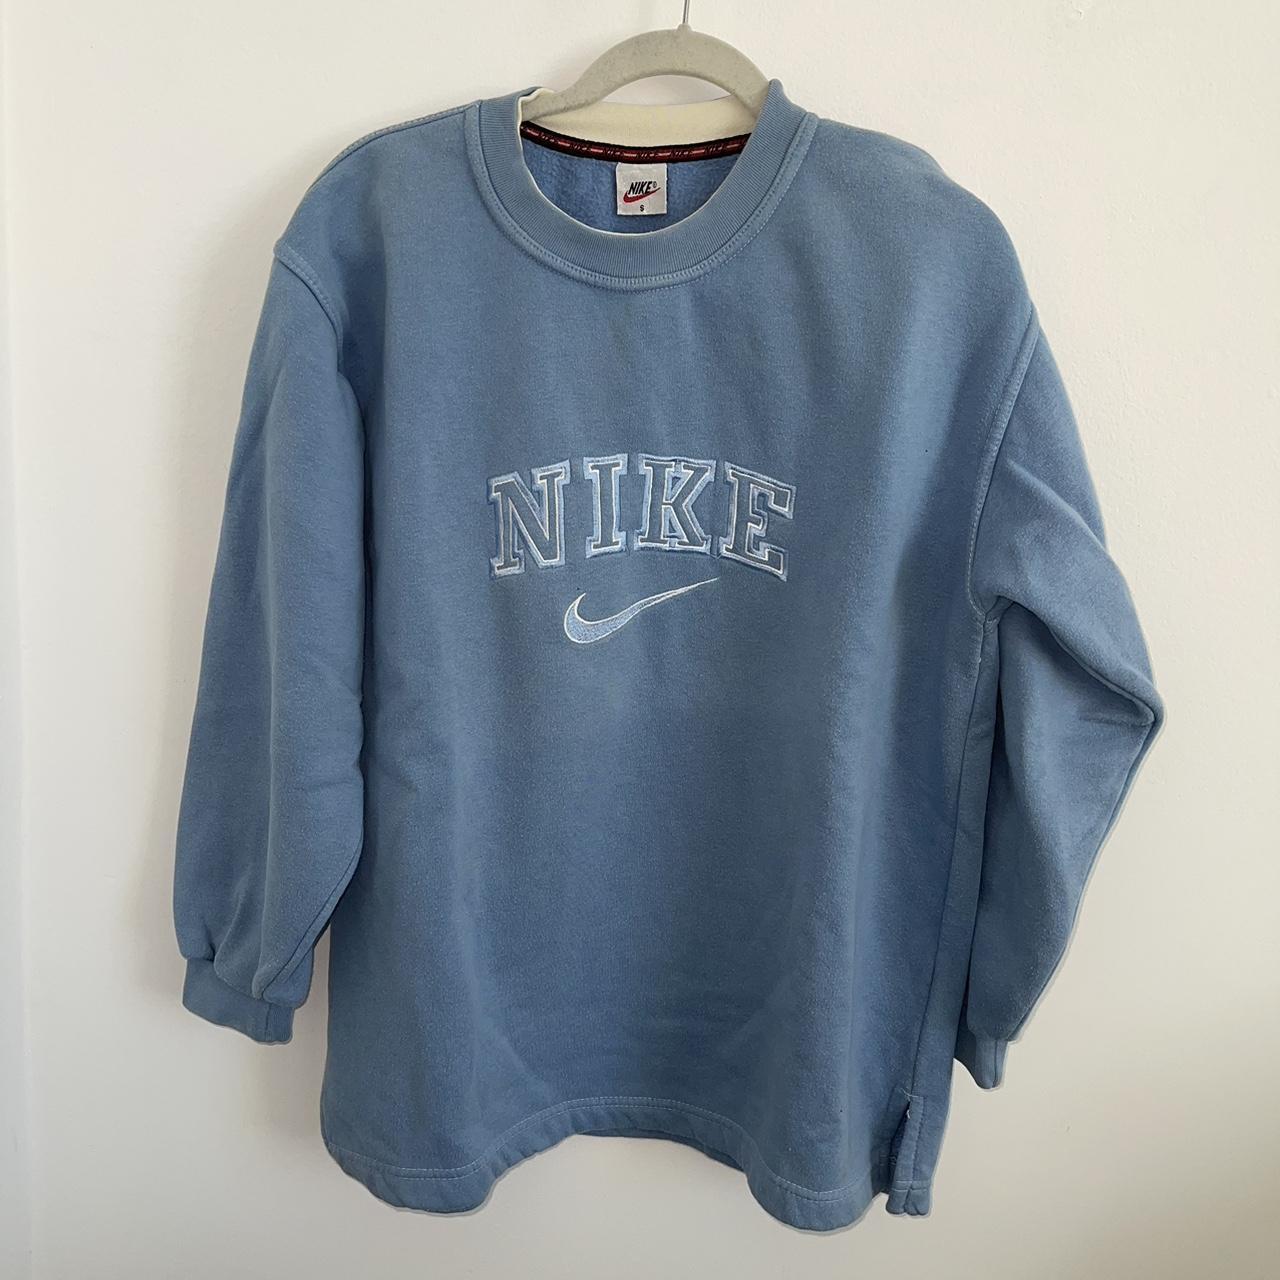 Vintage Nike Spell out crewneck Size small 🫶 - Depop